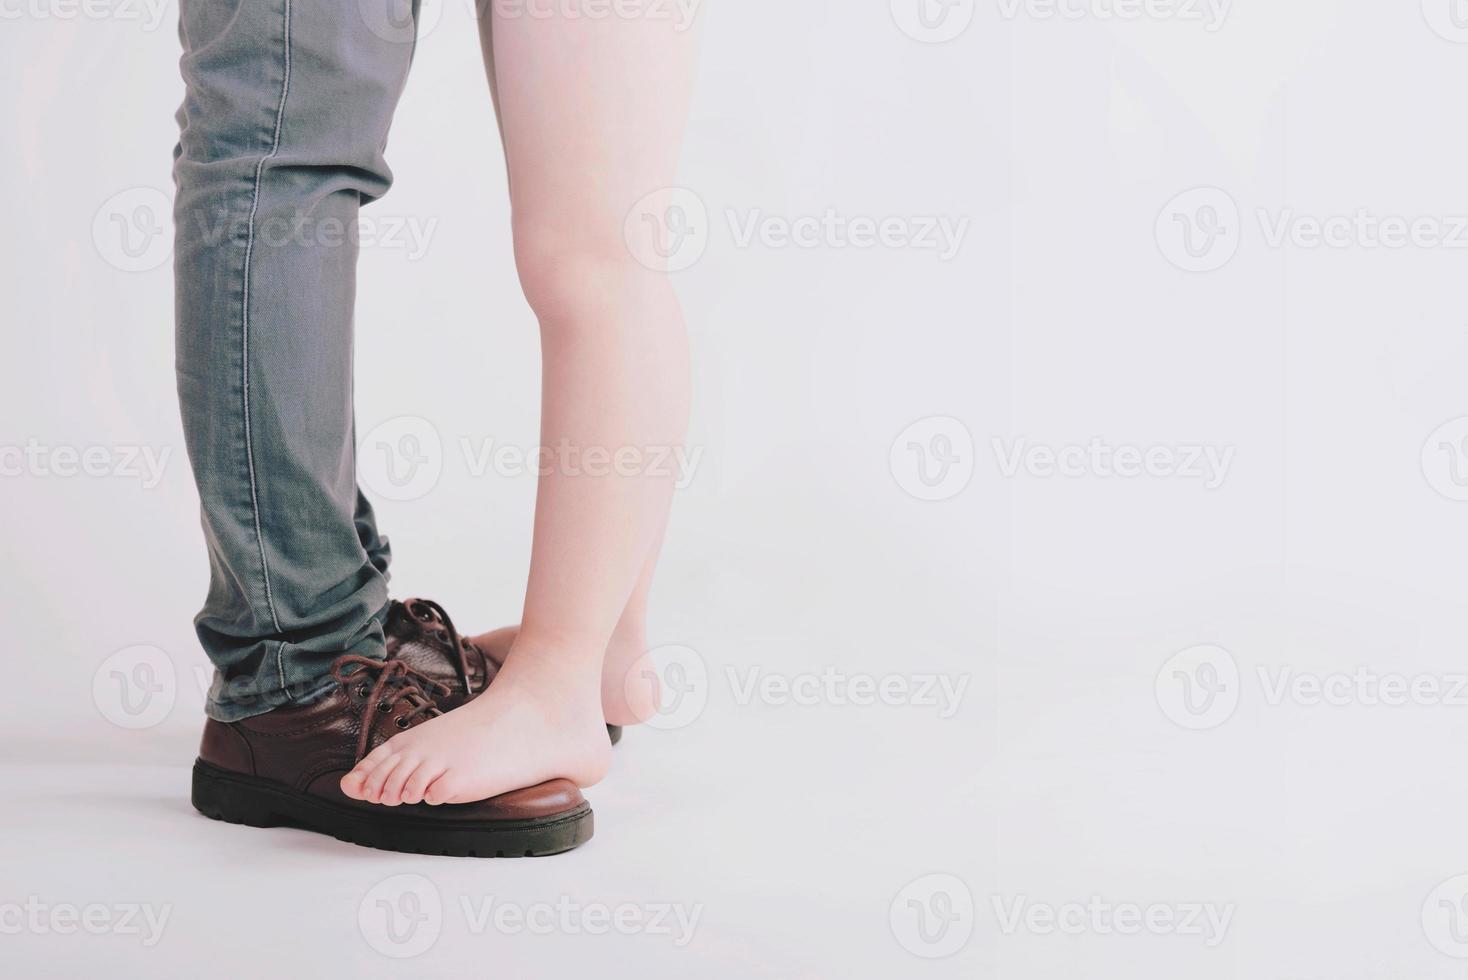 They are standing on father's feet photo